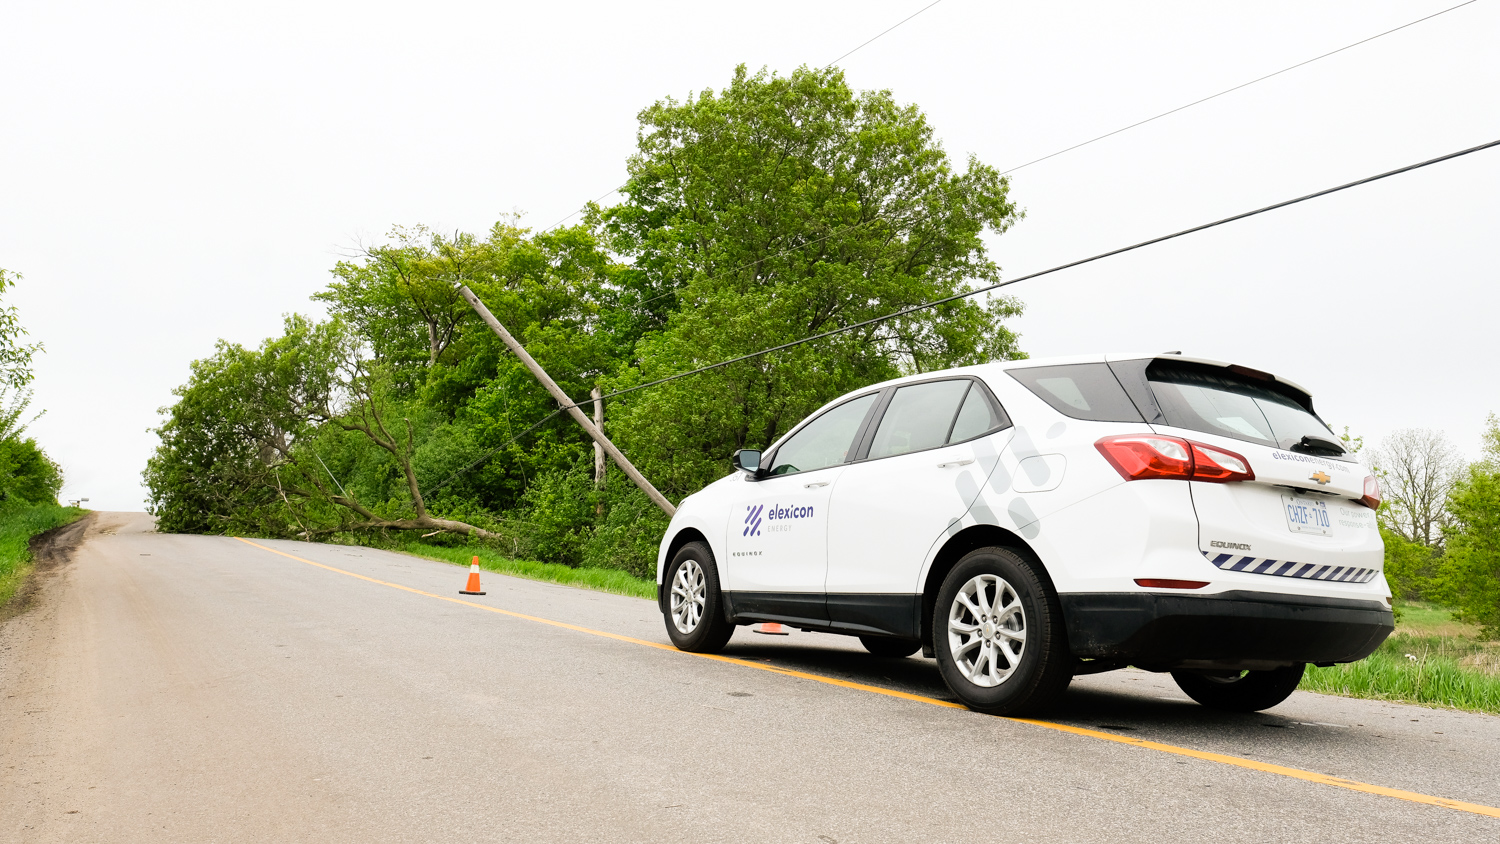 report-a-problem - Downed Power Lines image